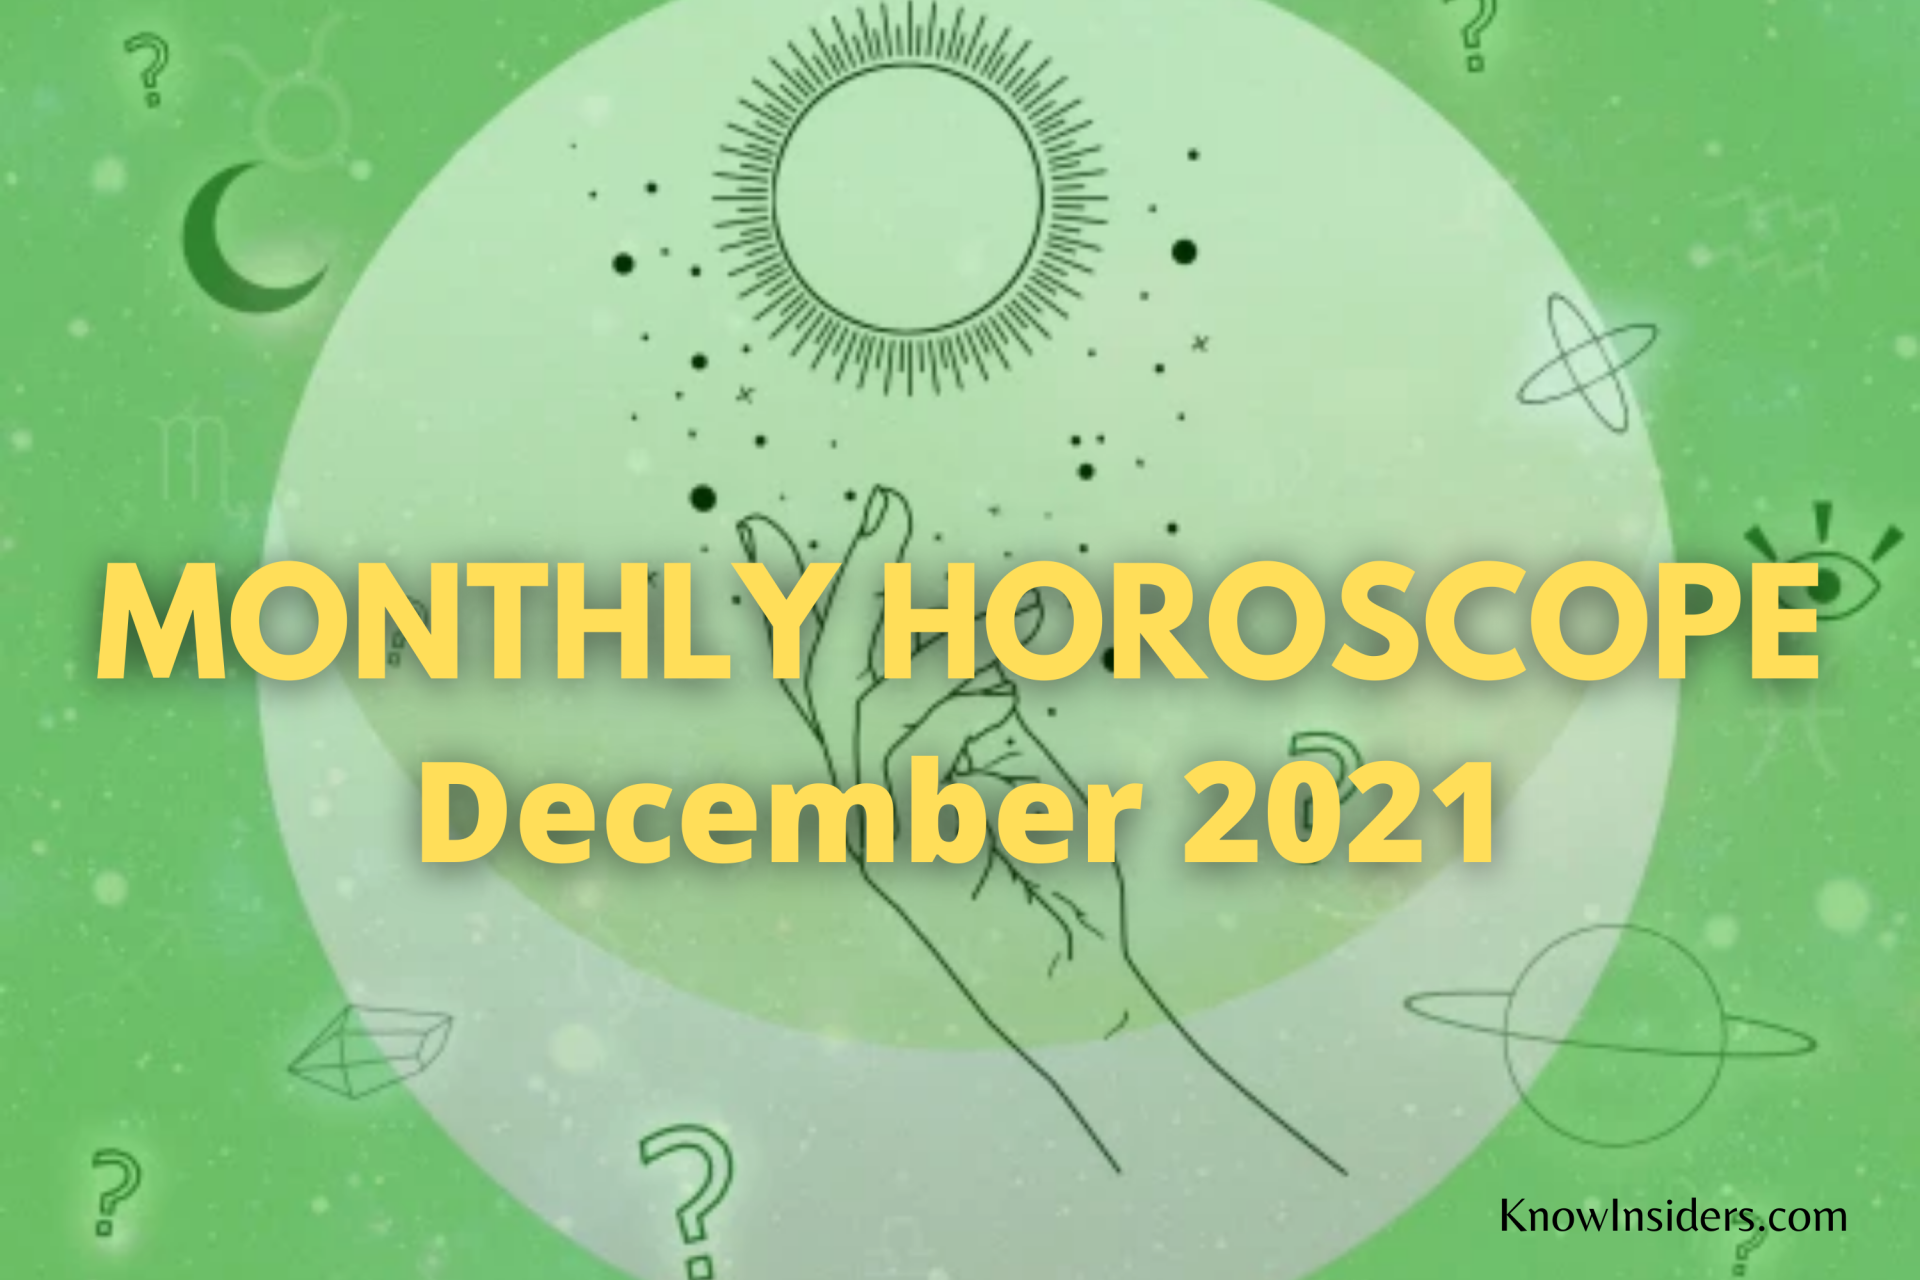 December 2021 Horoscope - Monthly Predictions for All 12 Zodiac Signs in Love, Career, Health and Finance